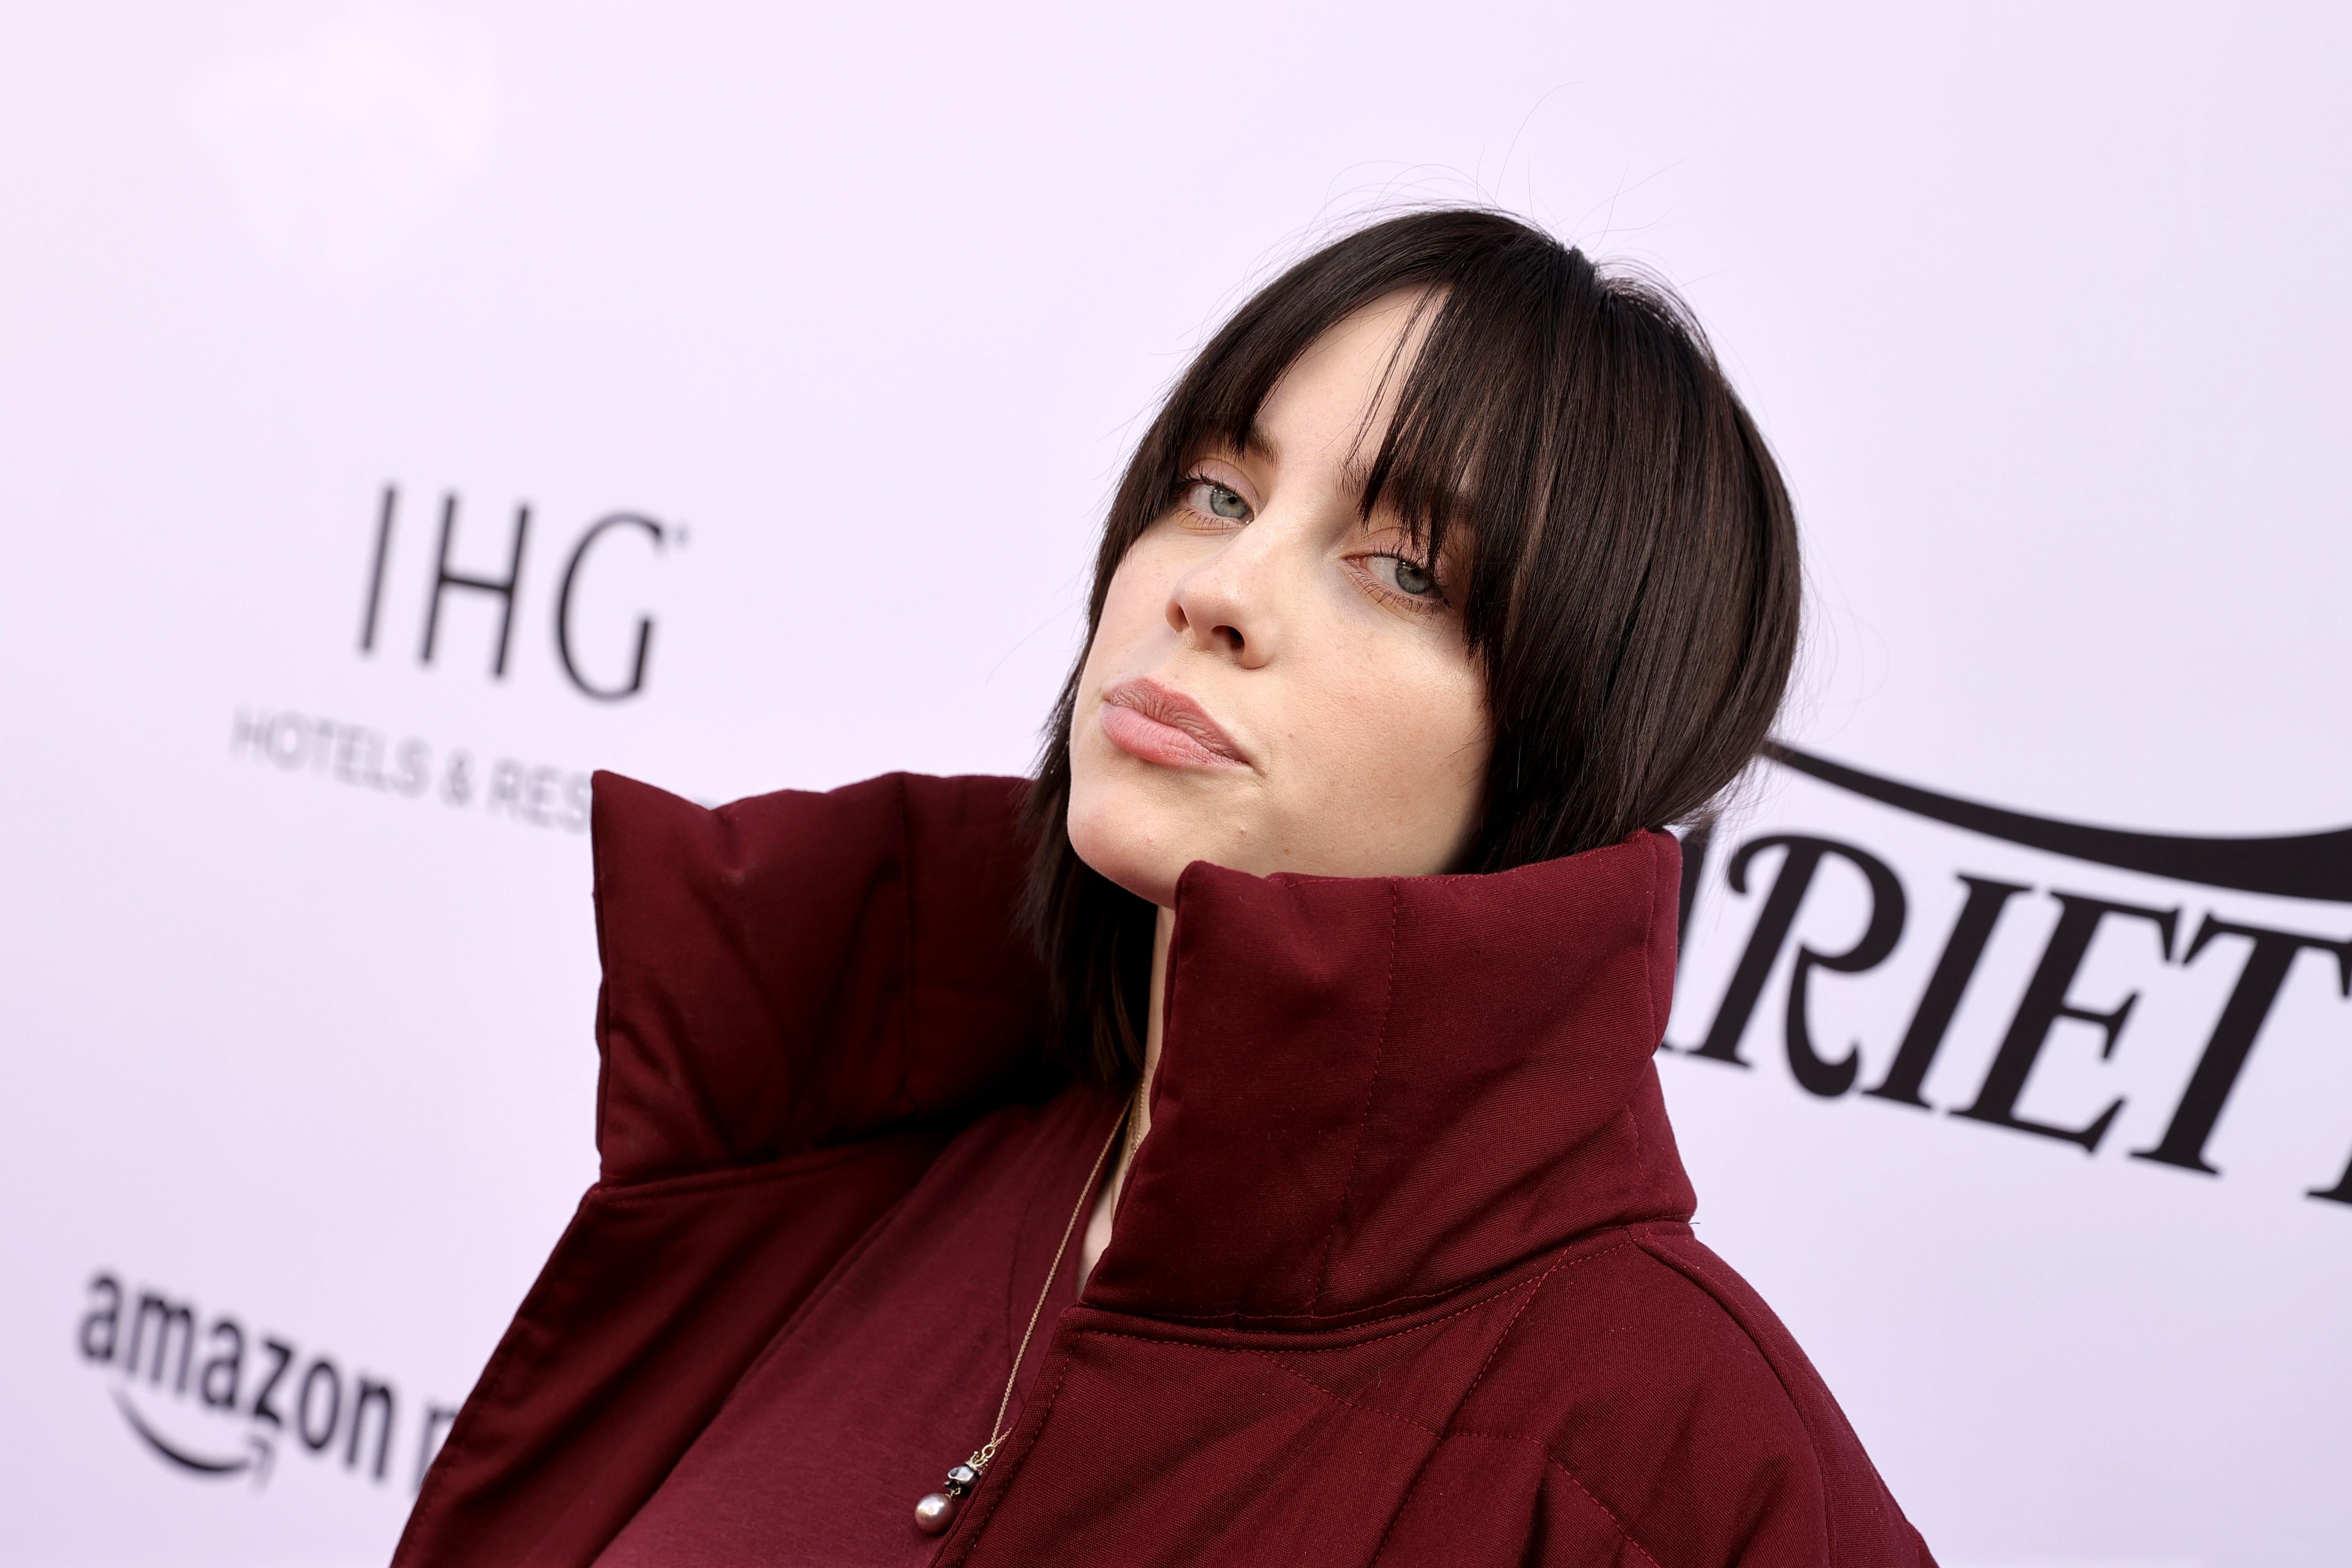 LOS ANGELES, CALIFORNIA - DECEMBER 04: Billie Eilish attends Variety's Hitmakers Brunch presented by Peacock | Girls5eva on December 04, 2021 in Downtown Los Angeles. (Photo by Kevin Winter/Getty Images for Variety)